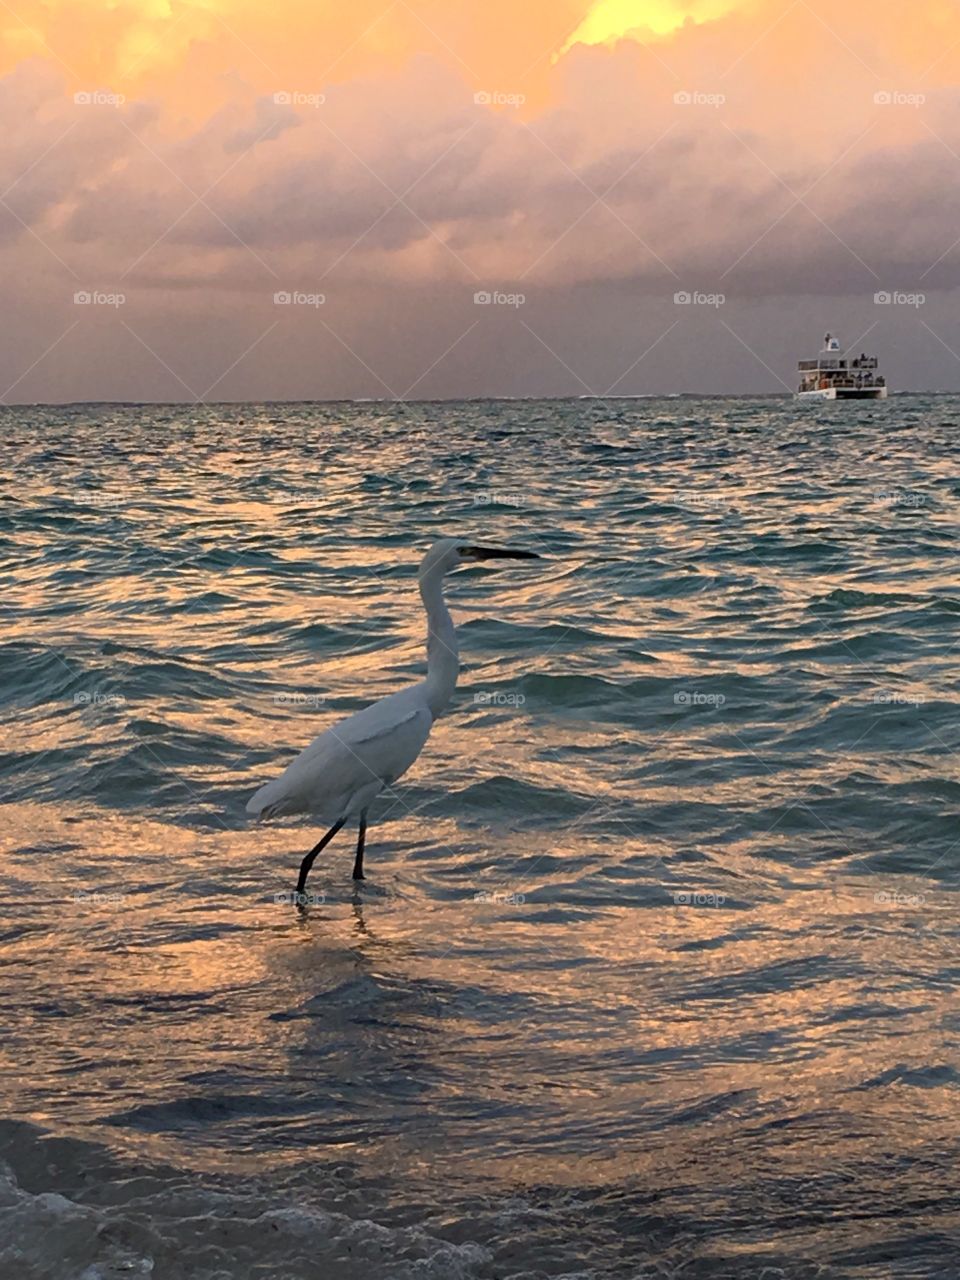 A Heron watching the sea during sunset in the Caribbean 